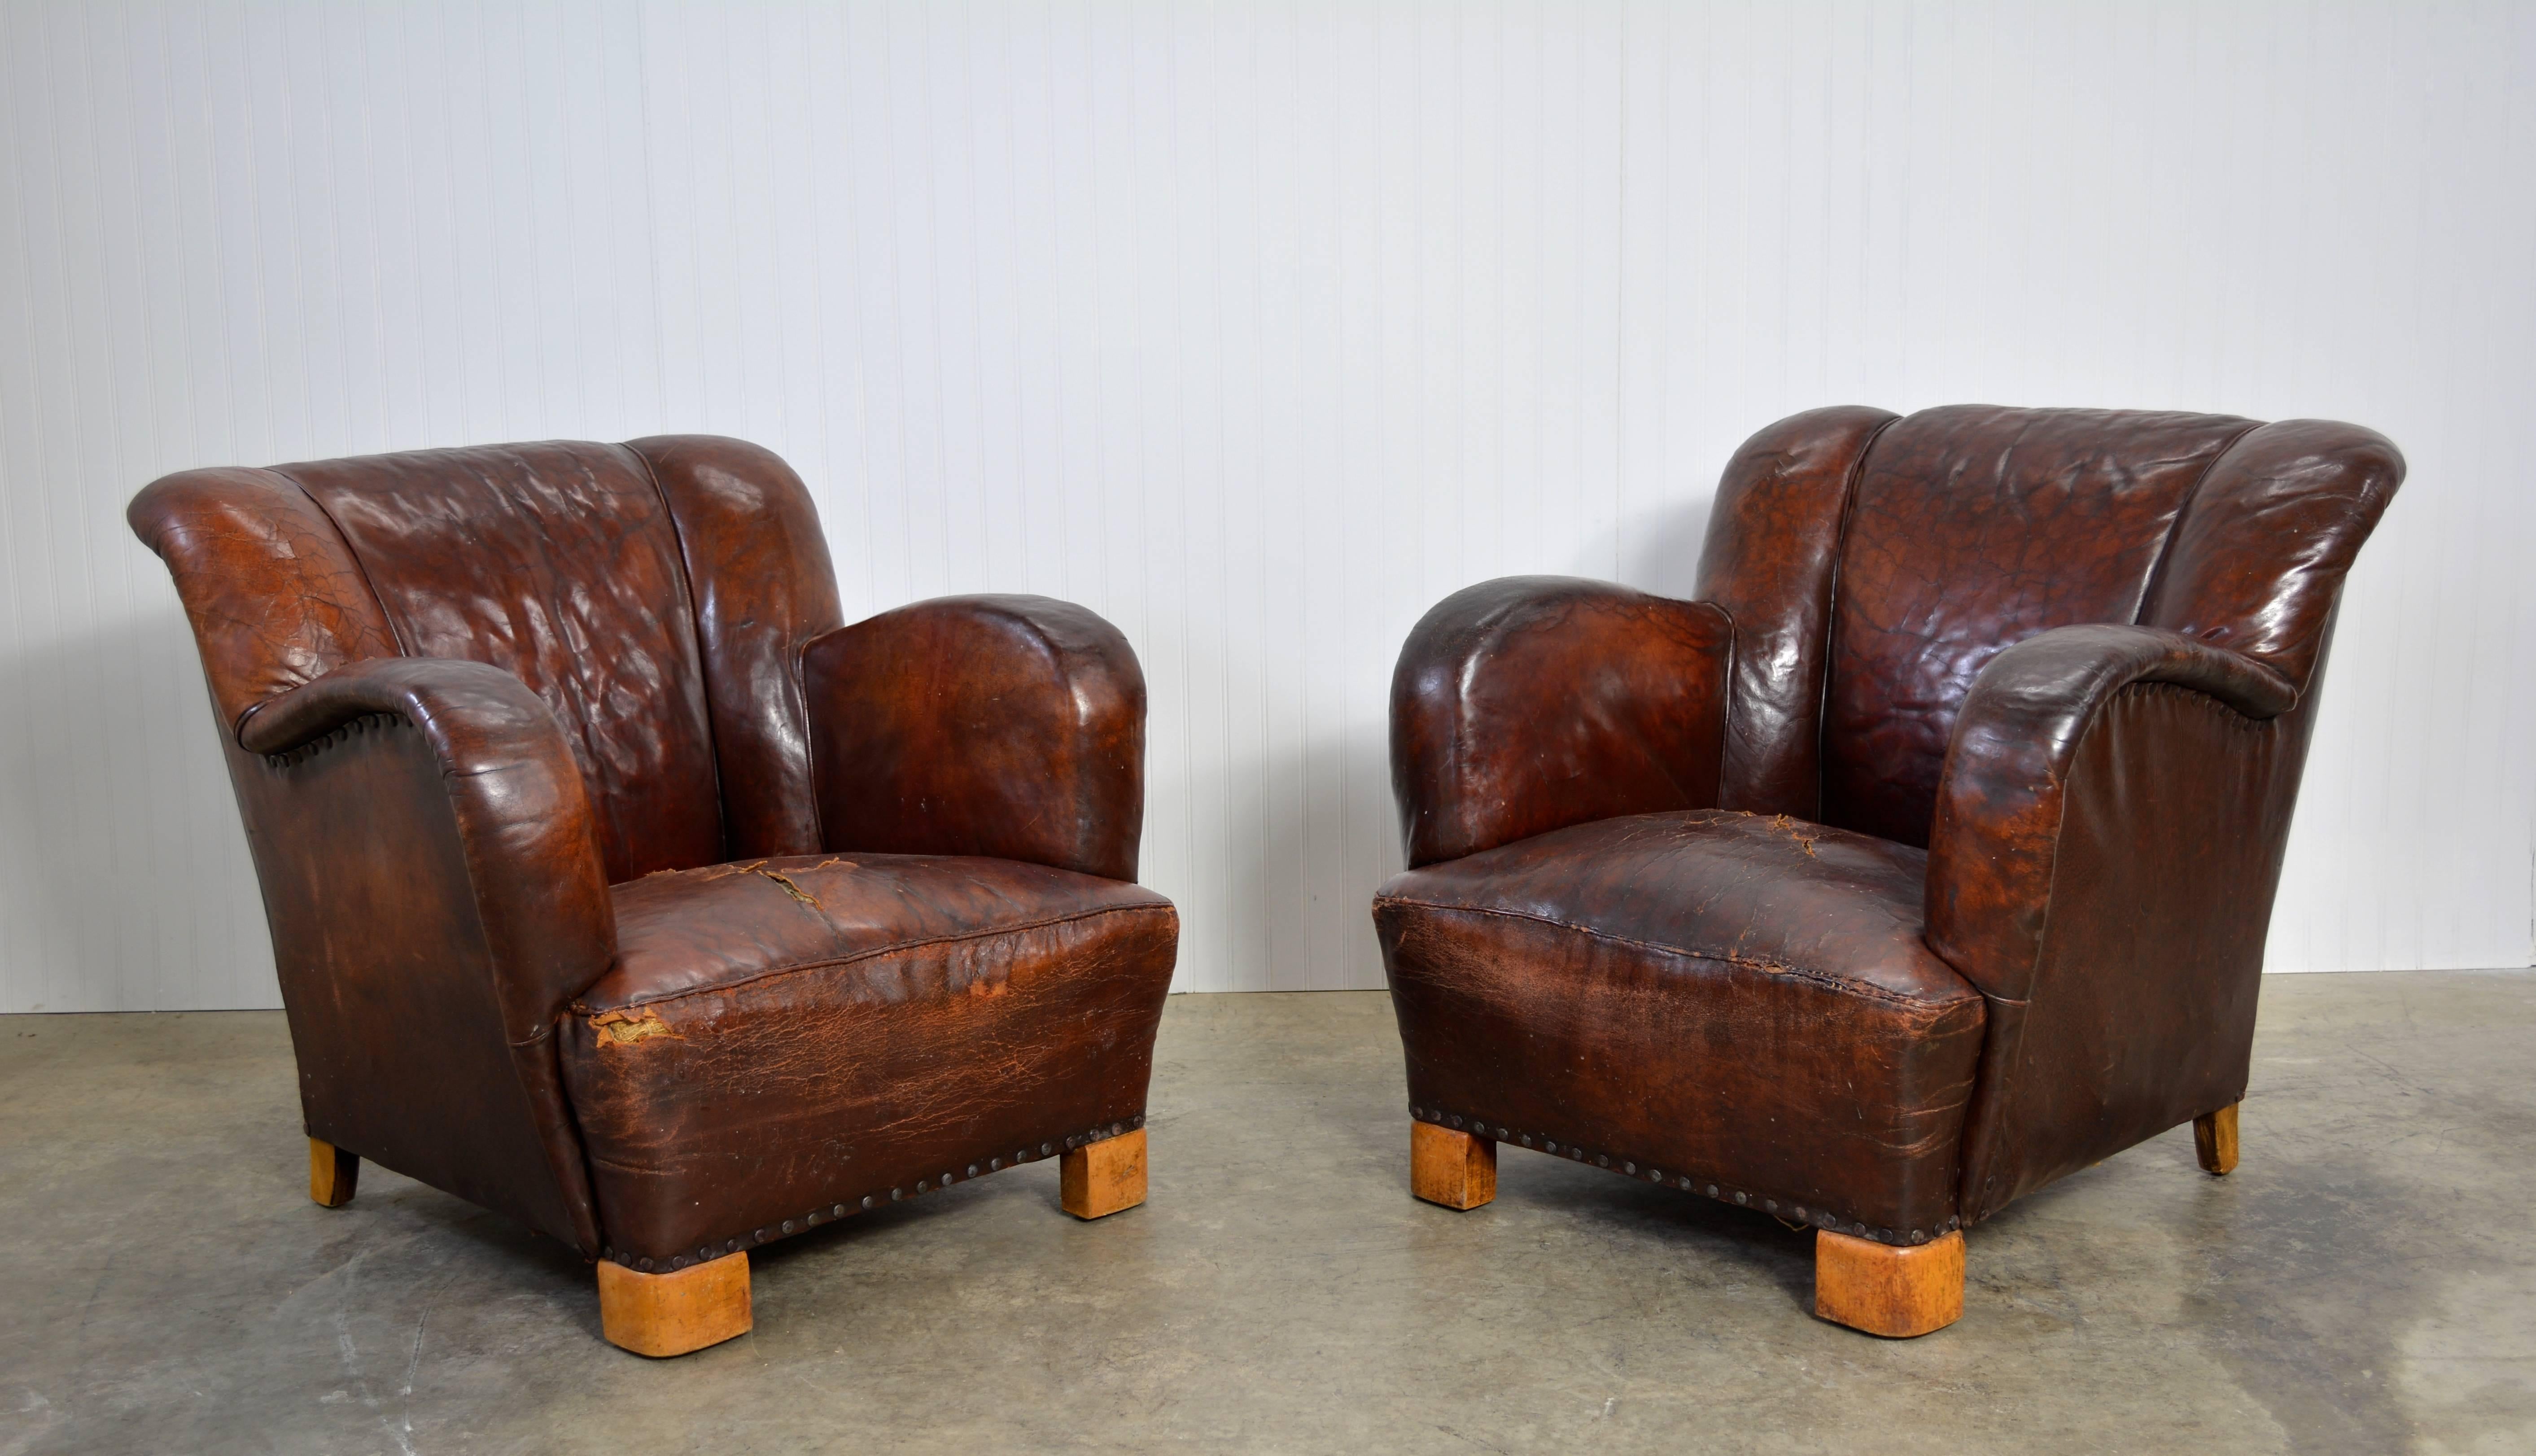 A pair of early Danish lounge chairs upholstered in their original leather.